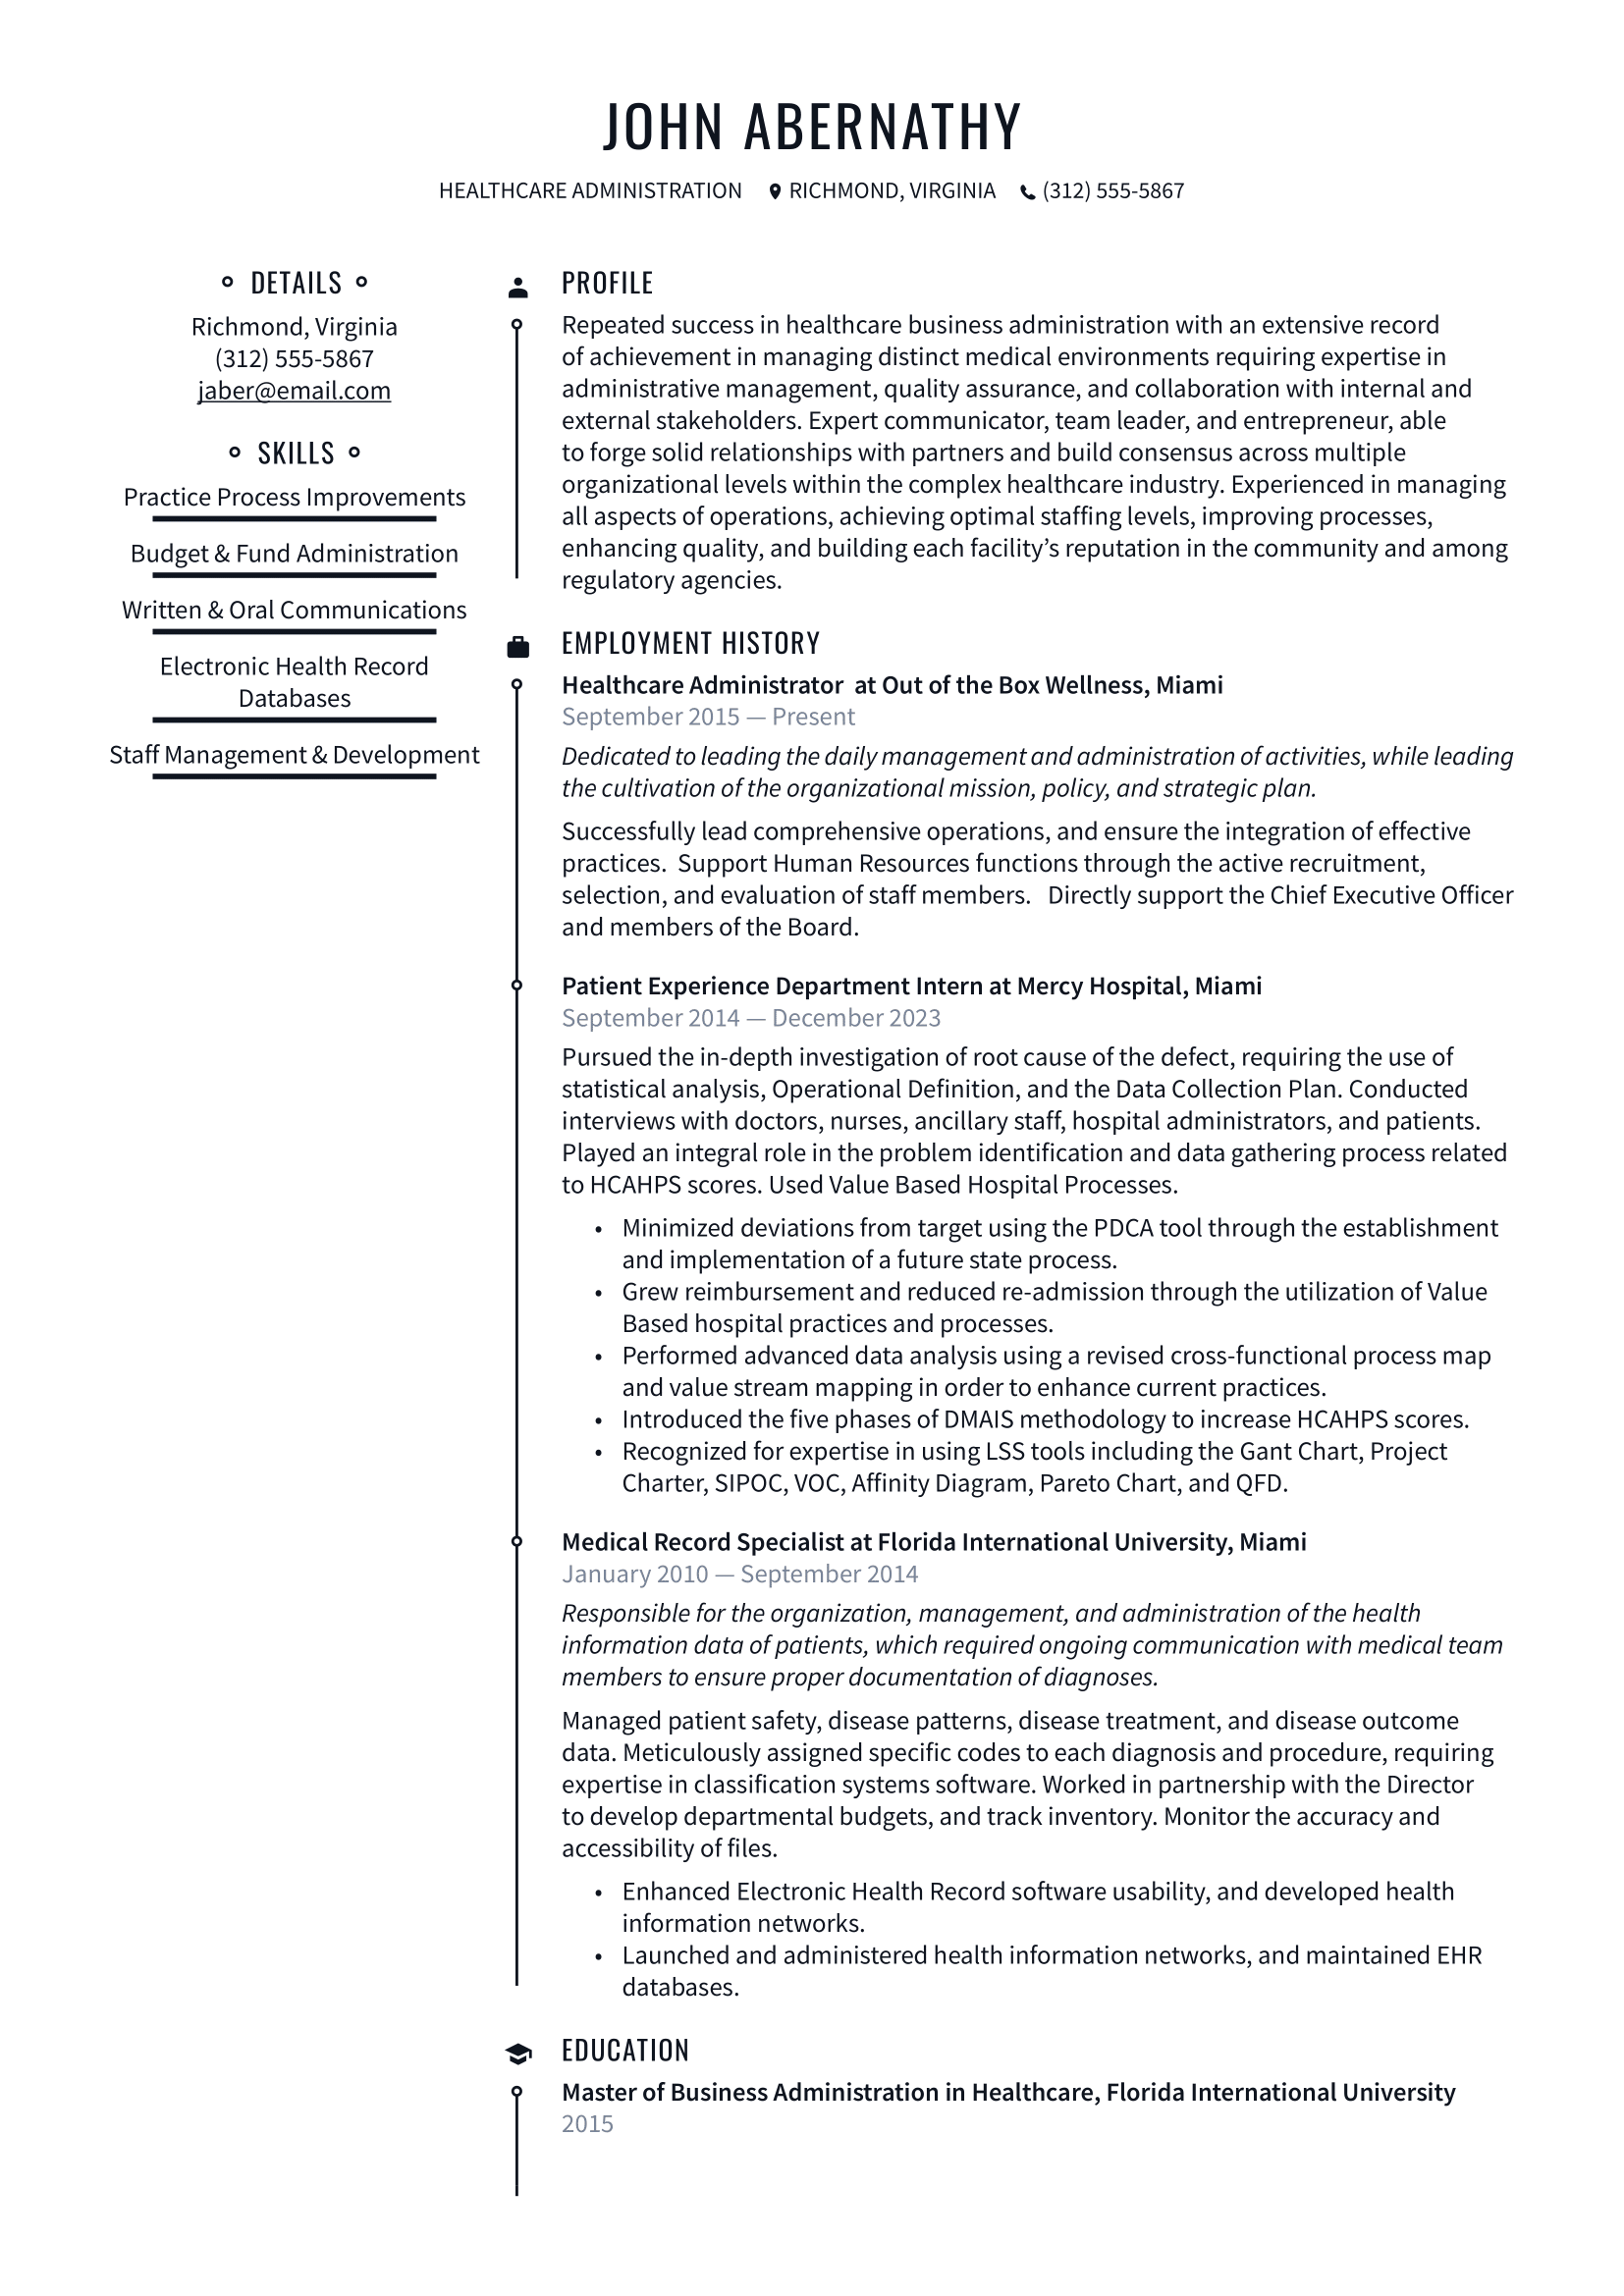 Healthcare_Administration-Resume-Example.png